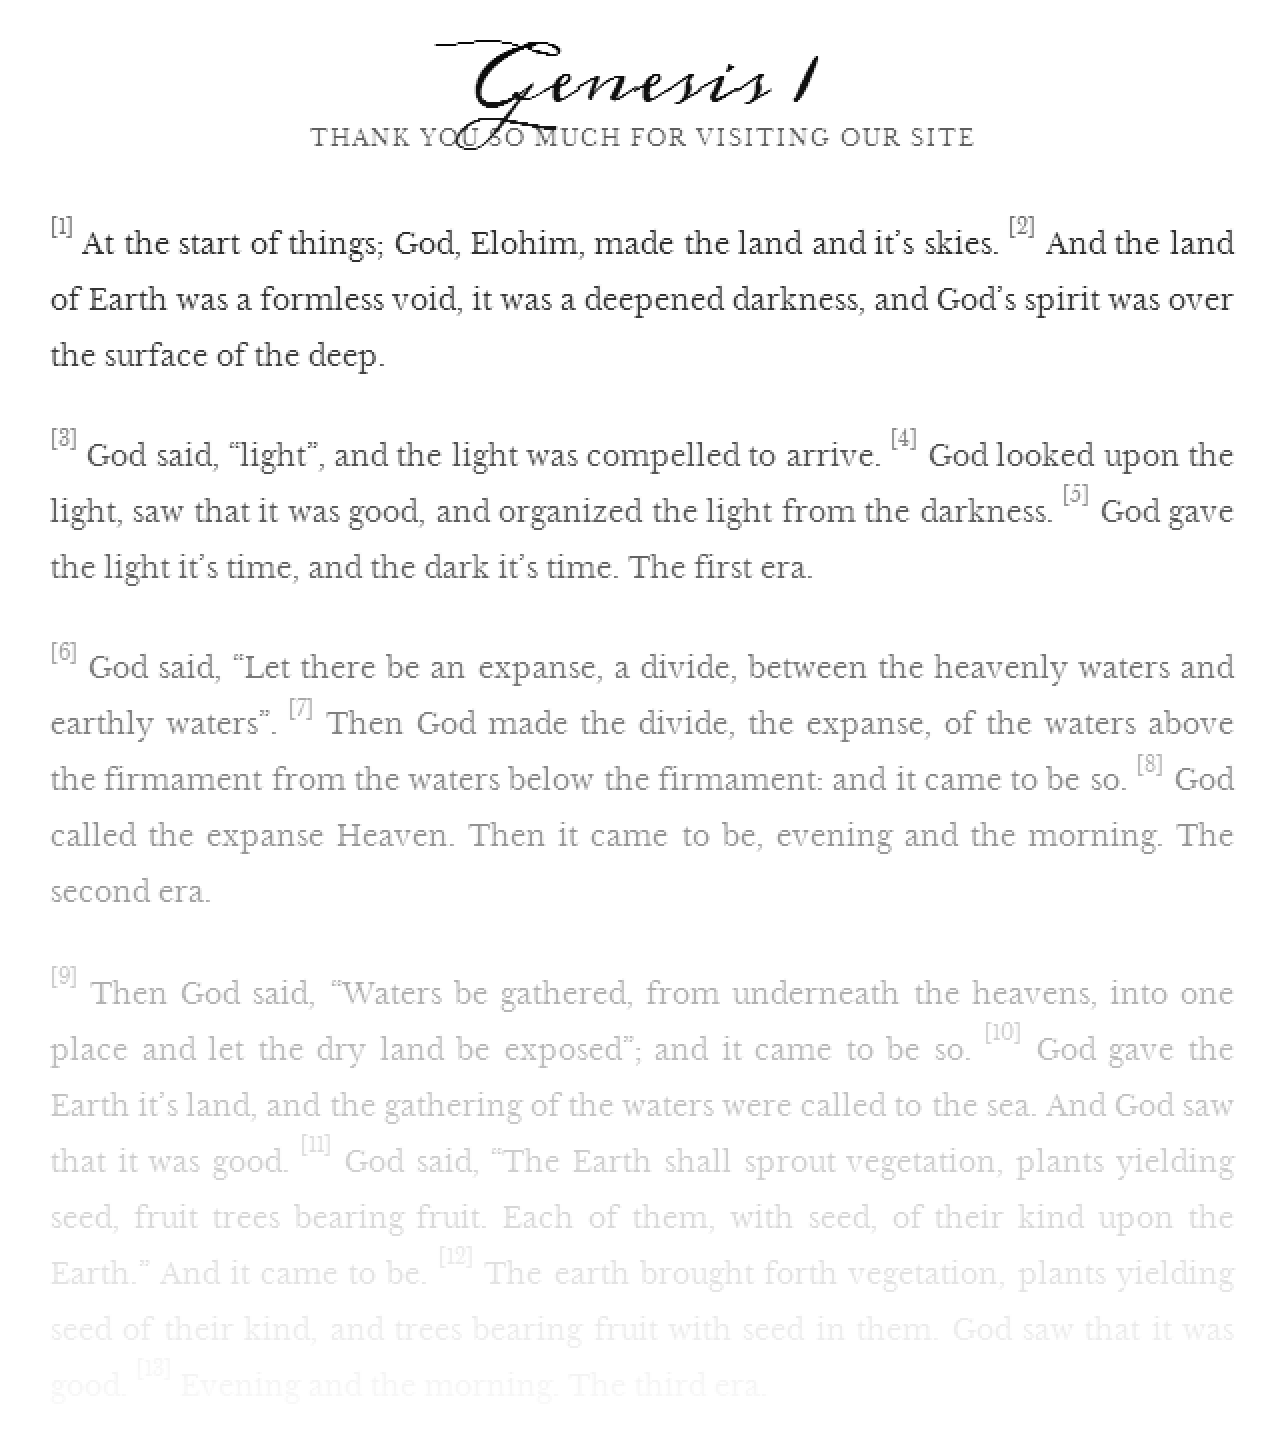 The Holy Bible | Genesis 1